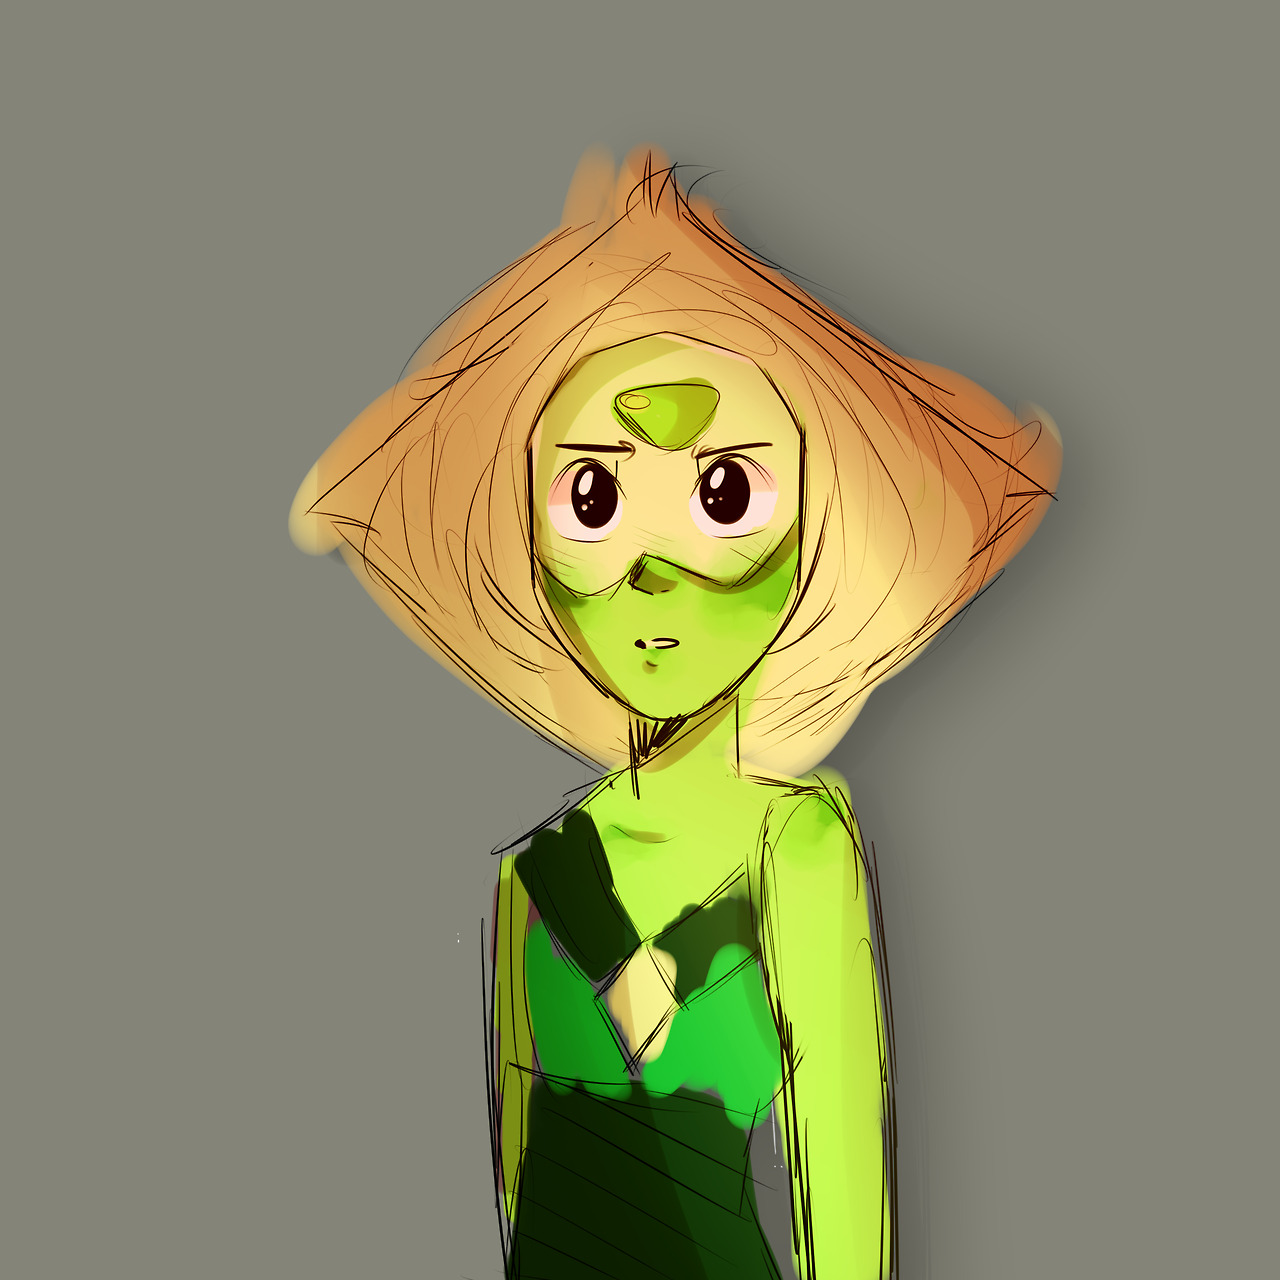 i haven’t drawn anything yet today n i’ve been rewatching steven universe a lot the past few days so have a peri sketch!!